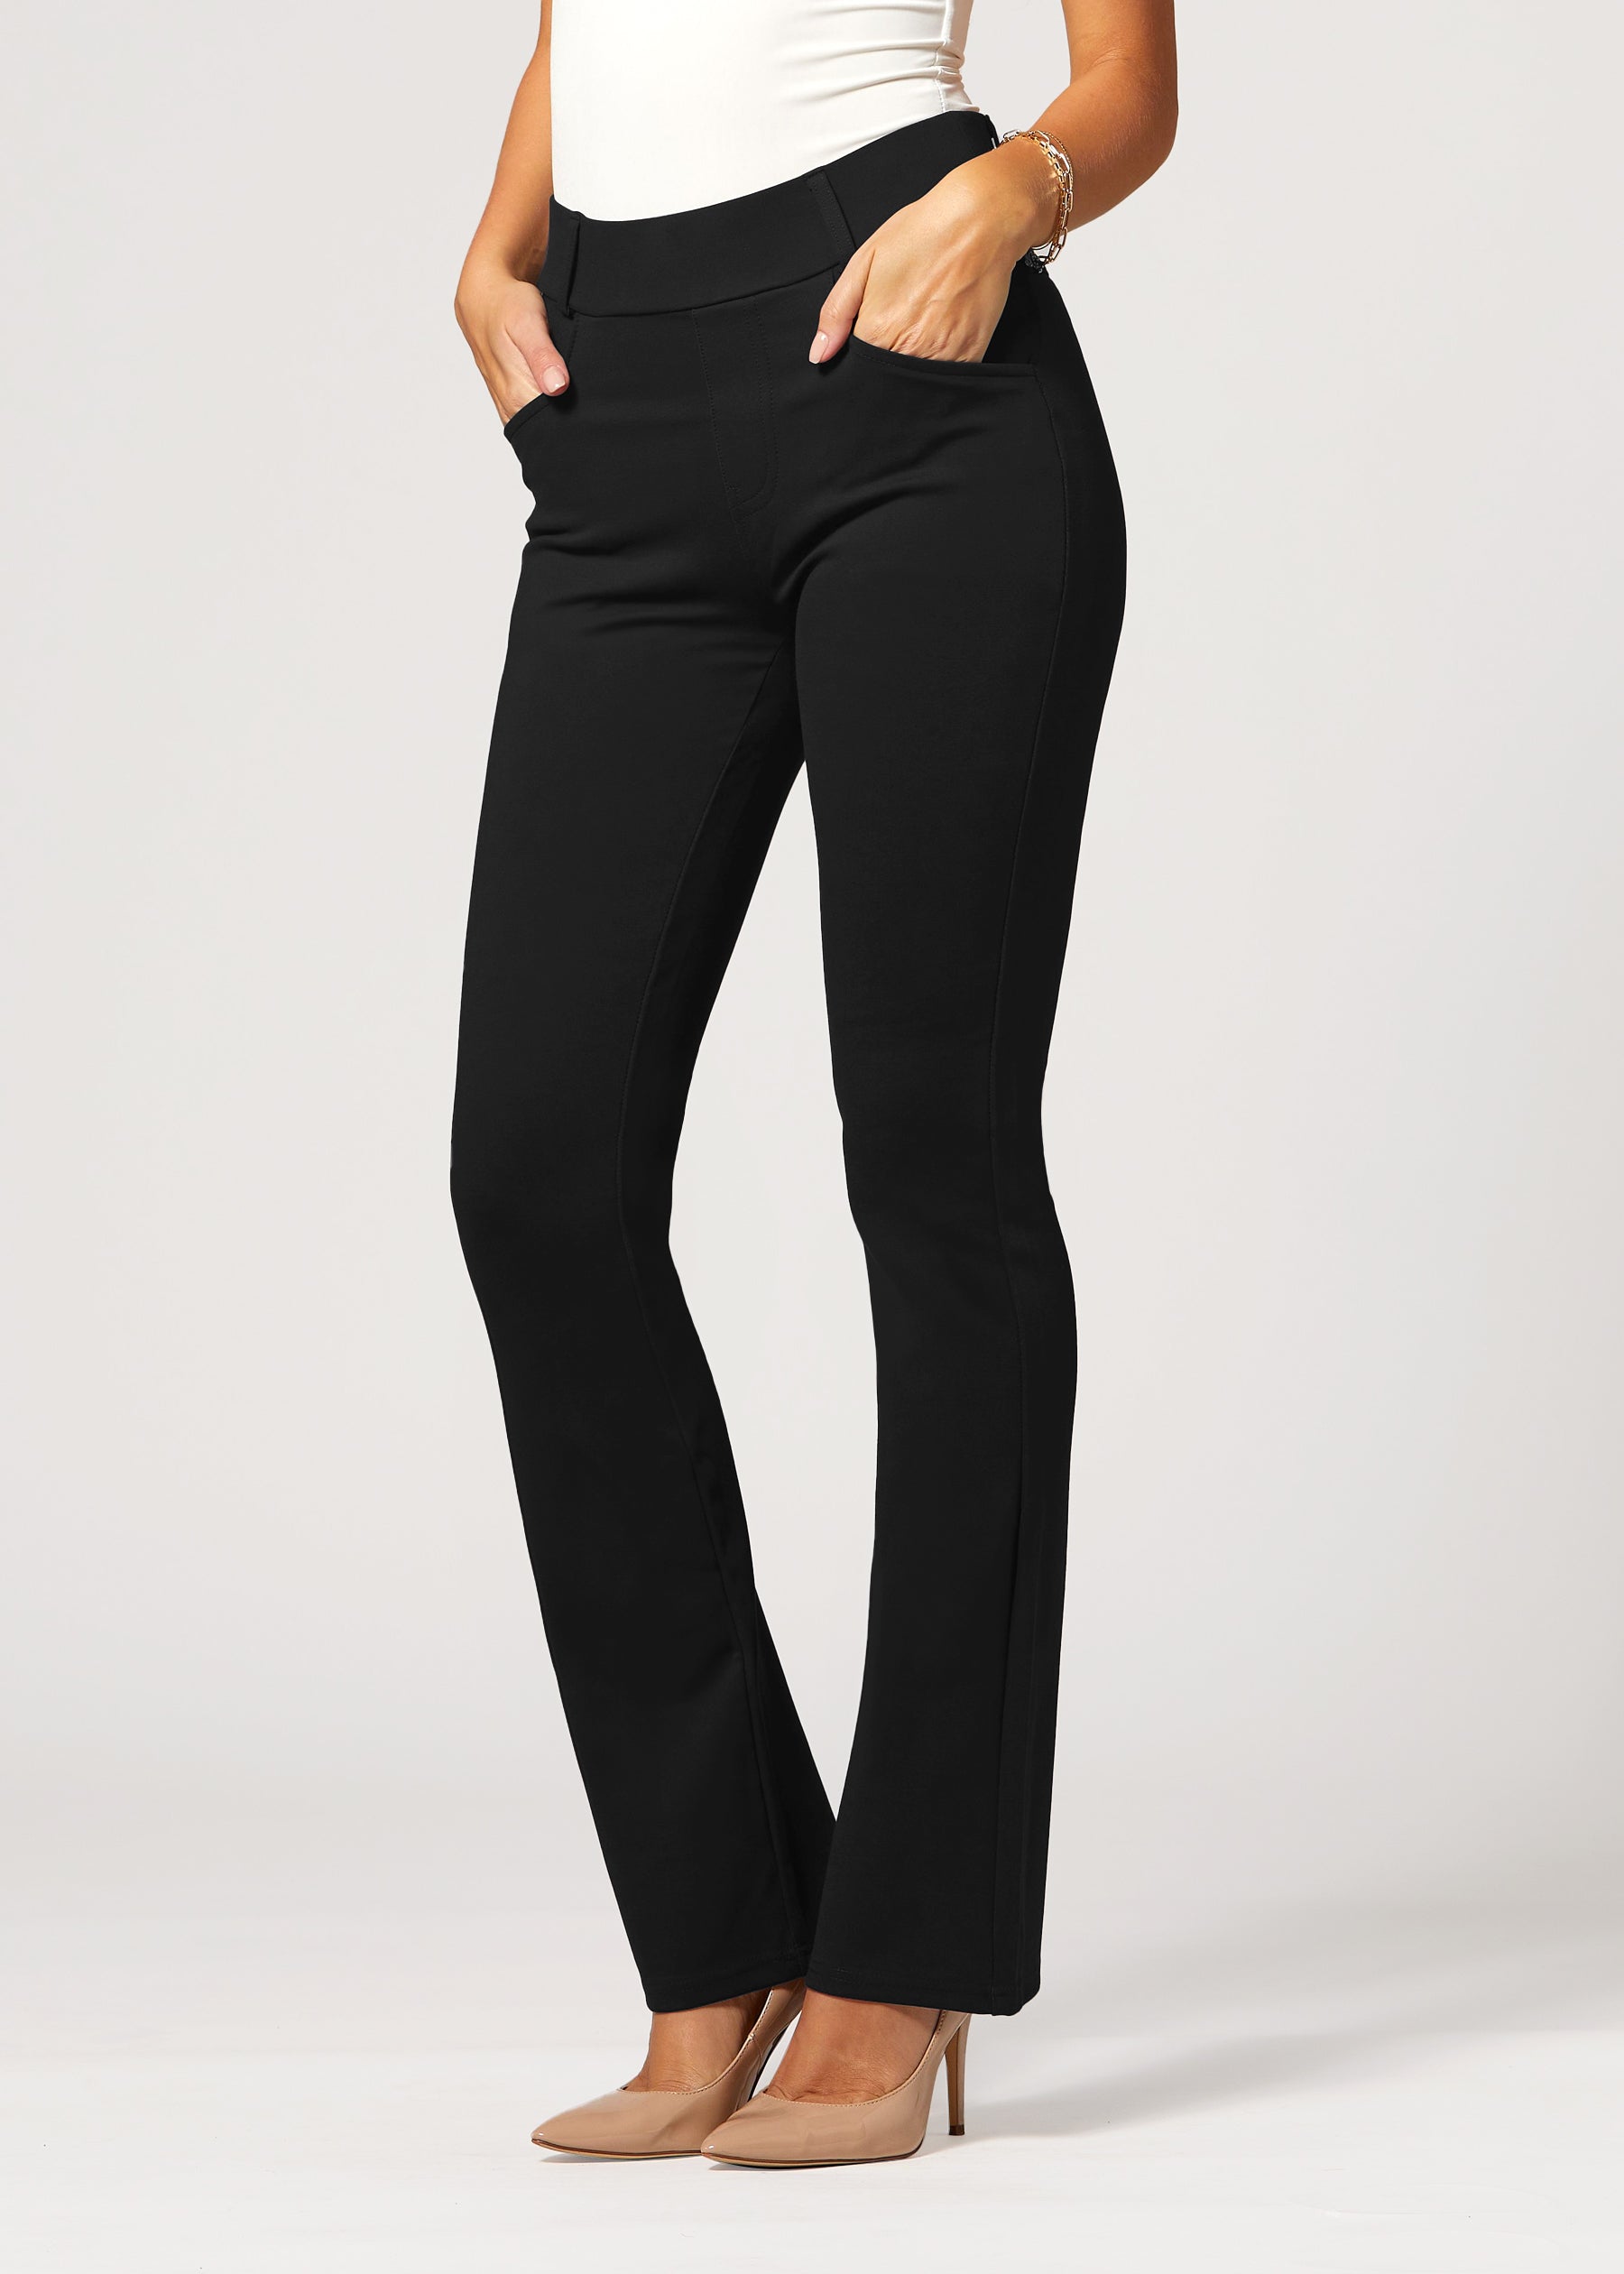 HSMQHJWE Conceited Dress Pants For Women Thick Leggings